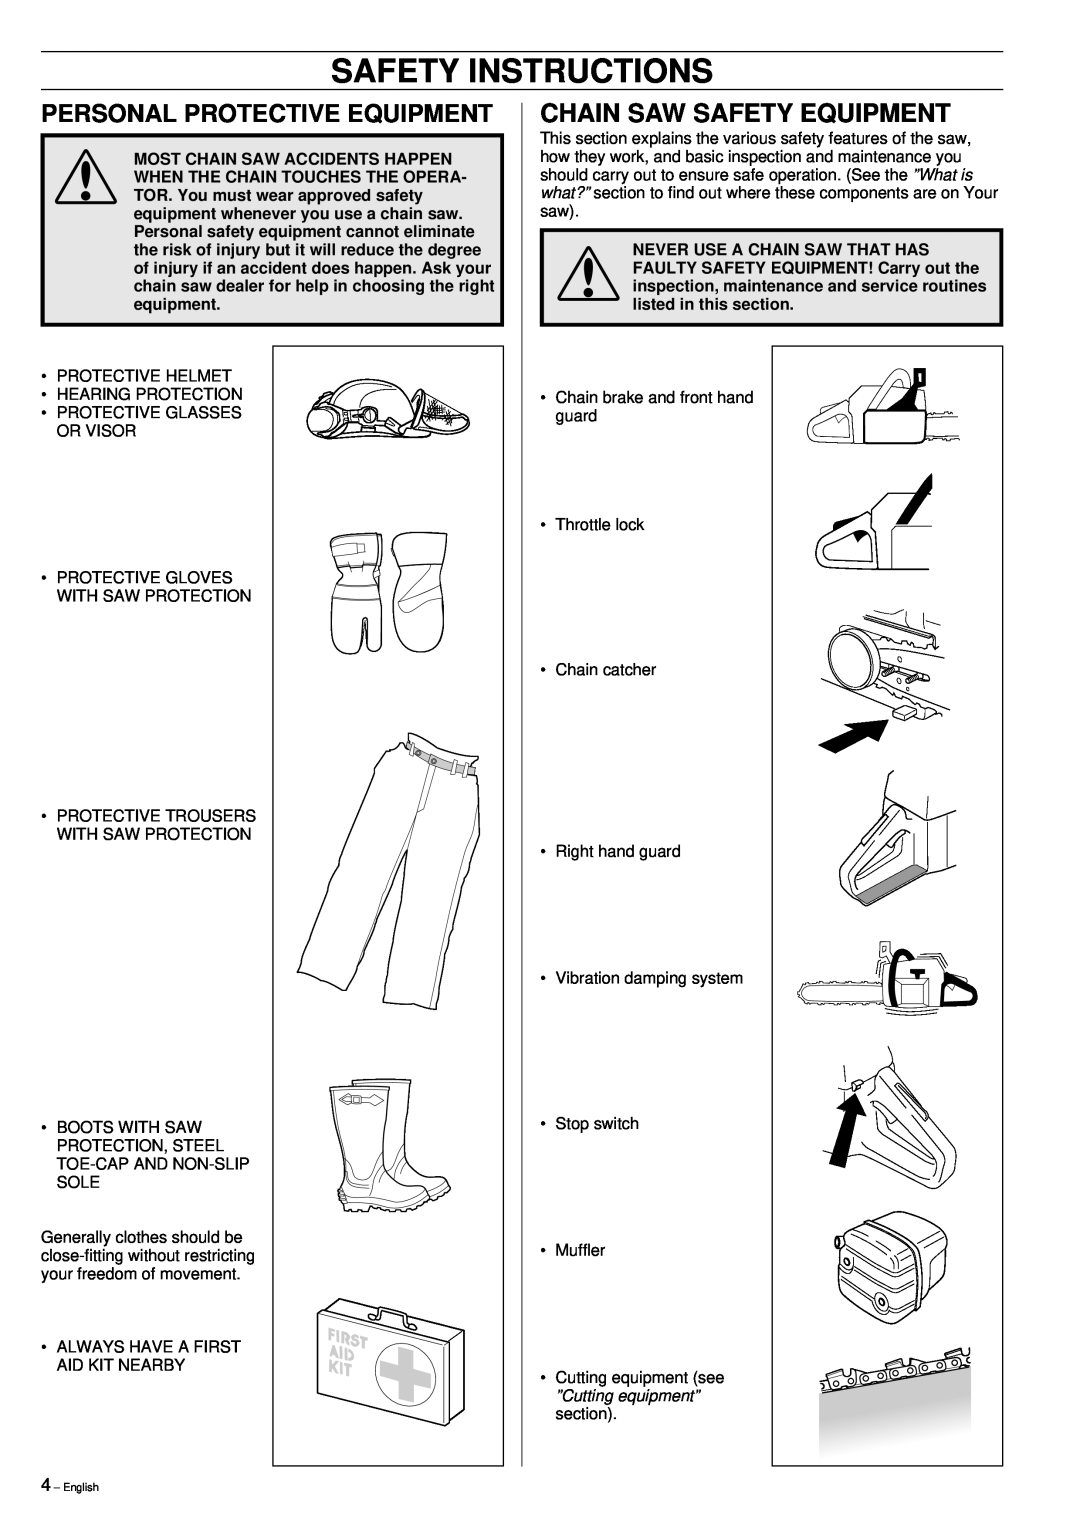 Jonsered 2149 manual Safety Instructions, Chain Saw Safety Equipment, Personal Protective Equipment 